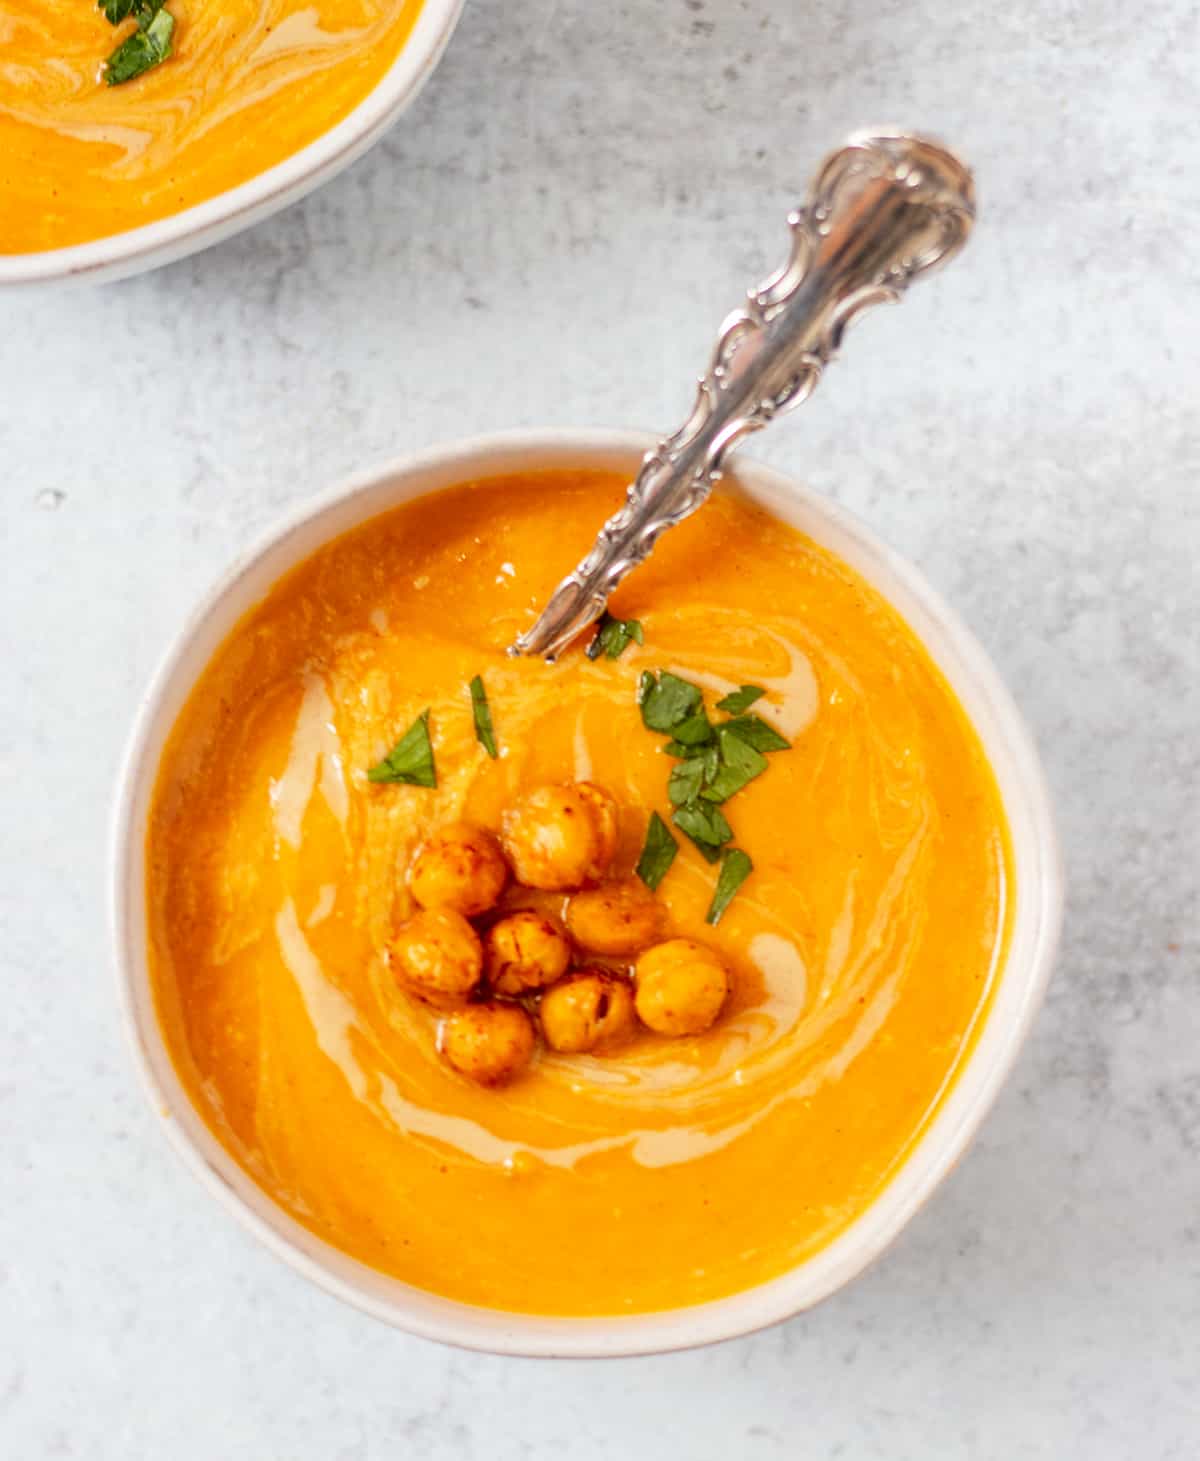  soup garnished with roasted chickpeas and chopped parsley